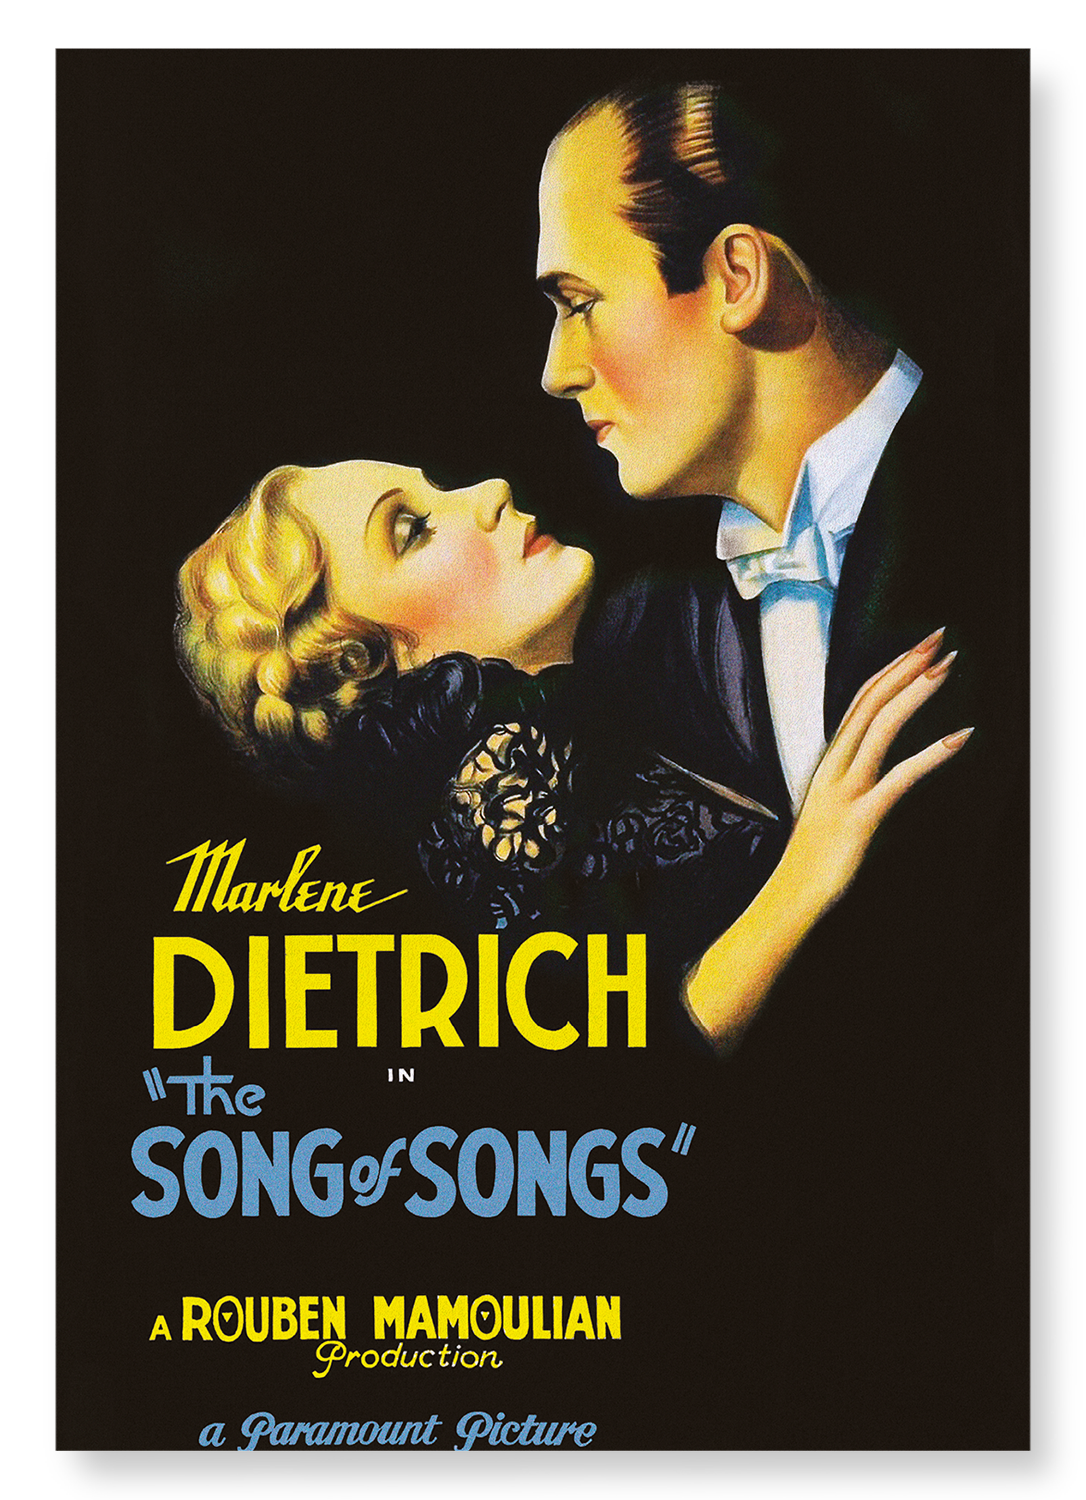 THE SONG OF SONGS (1933)